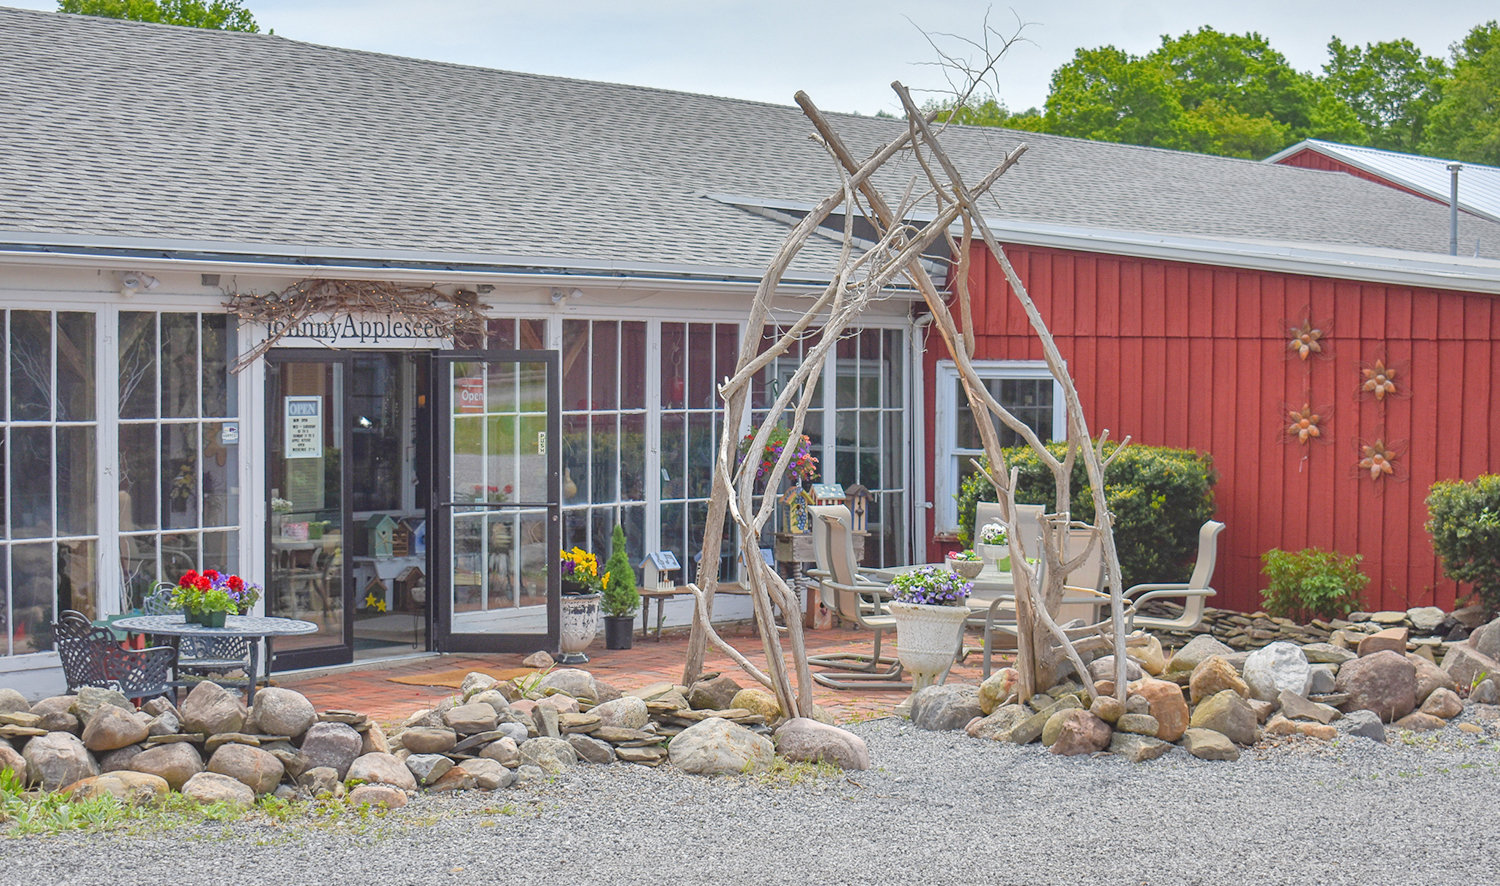 The Shoppes at Johnny Appleseed, located at 3402 Old State Road in Erieville, is a unique cooperative-style artisan marketplace.